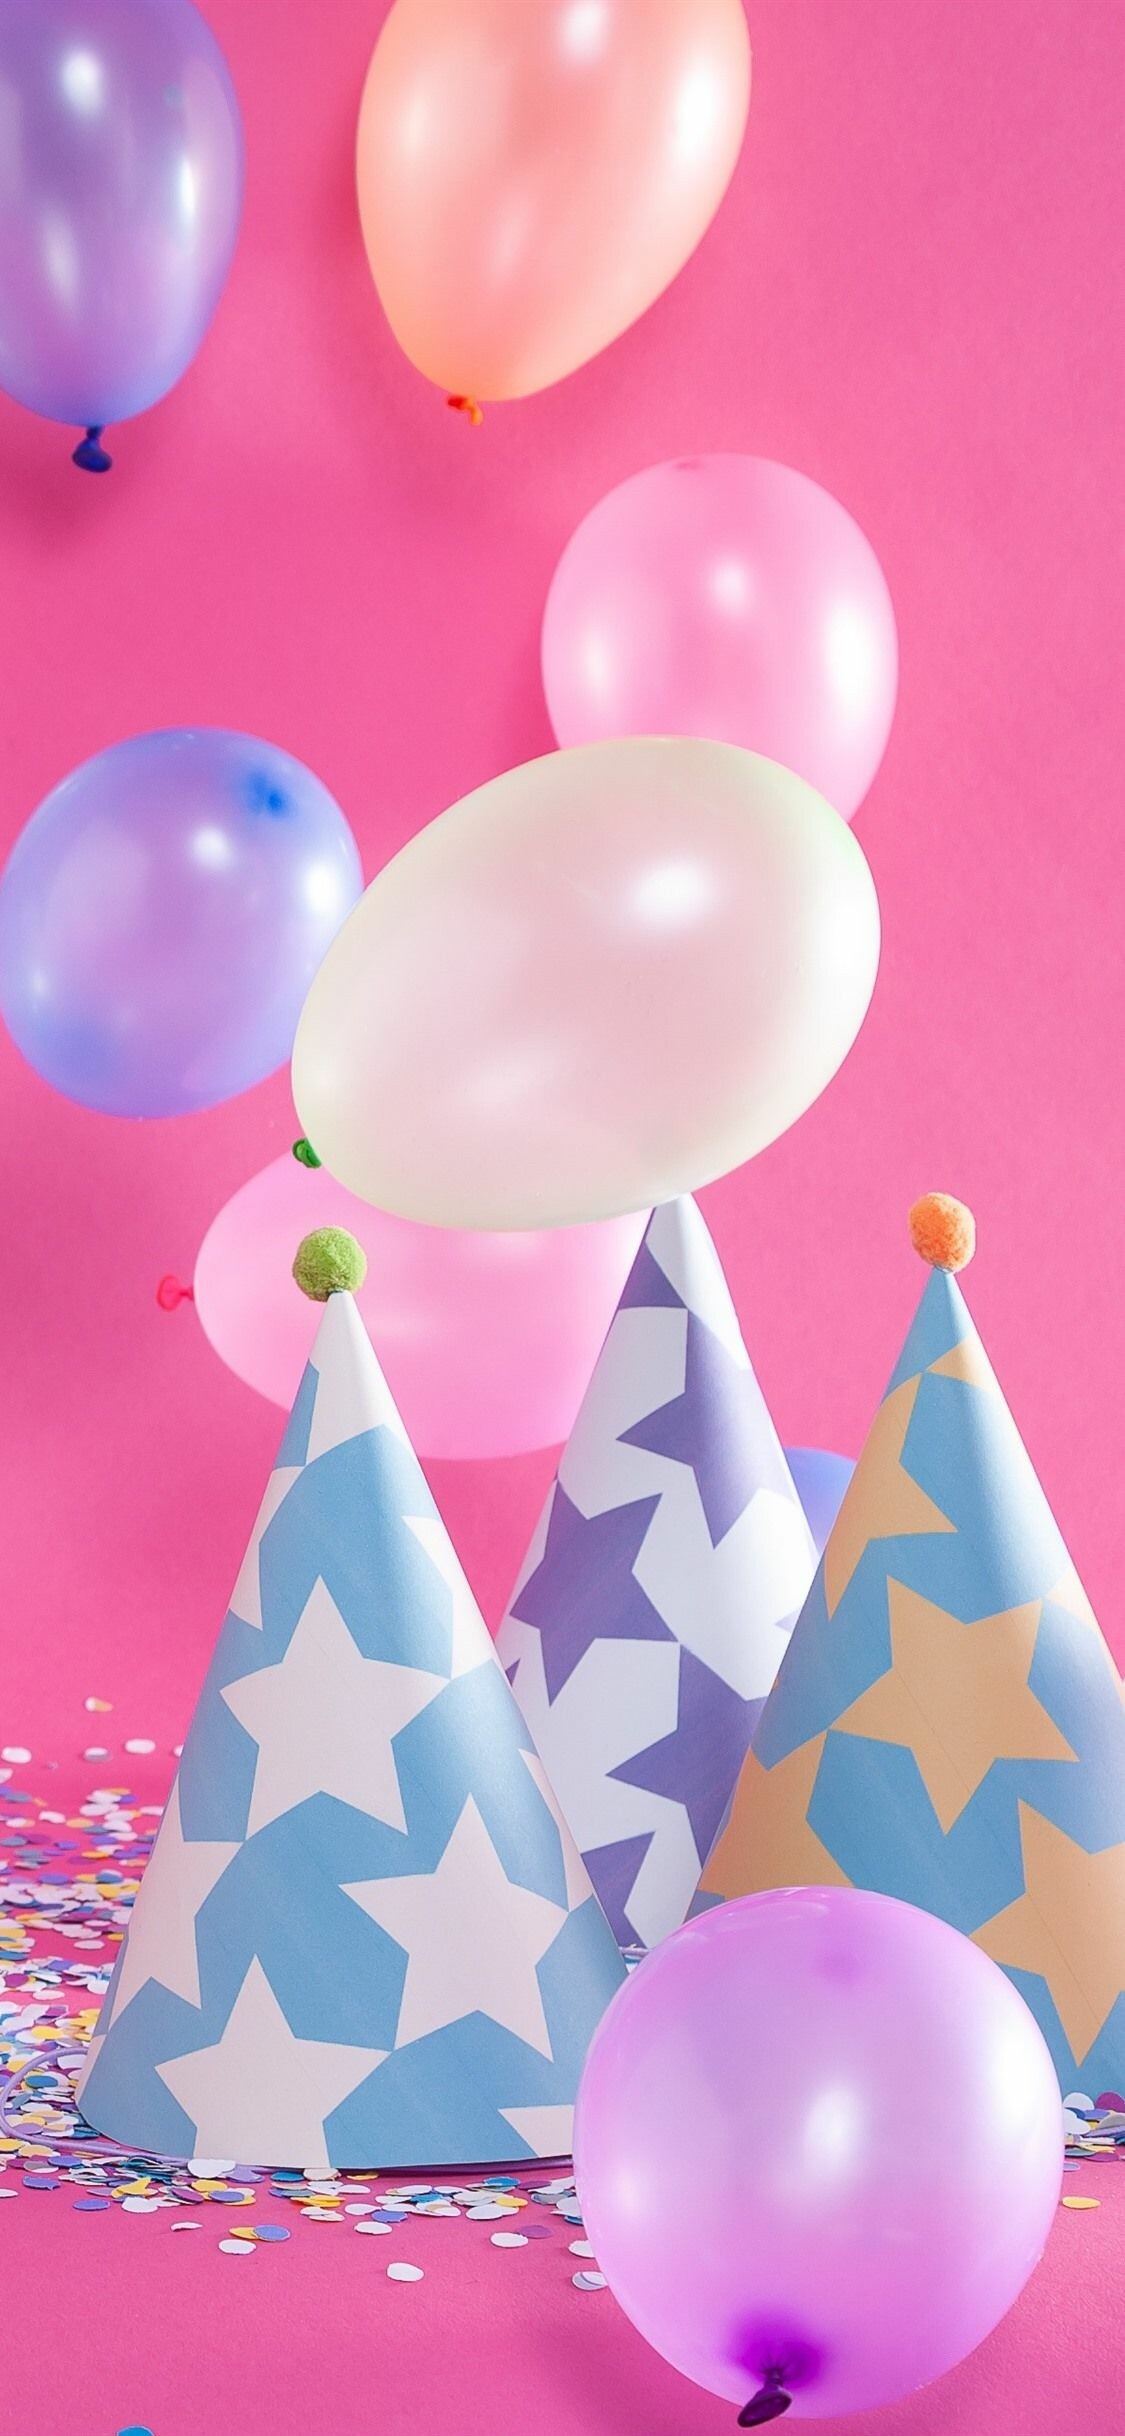 Balloons: Used for decorating birthday parties, weddings, and for other festive gatherings. 1130x2440 HD Background.